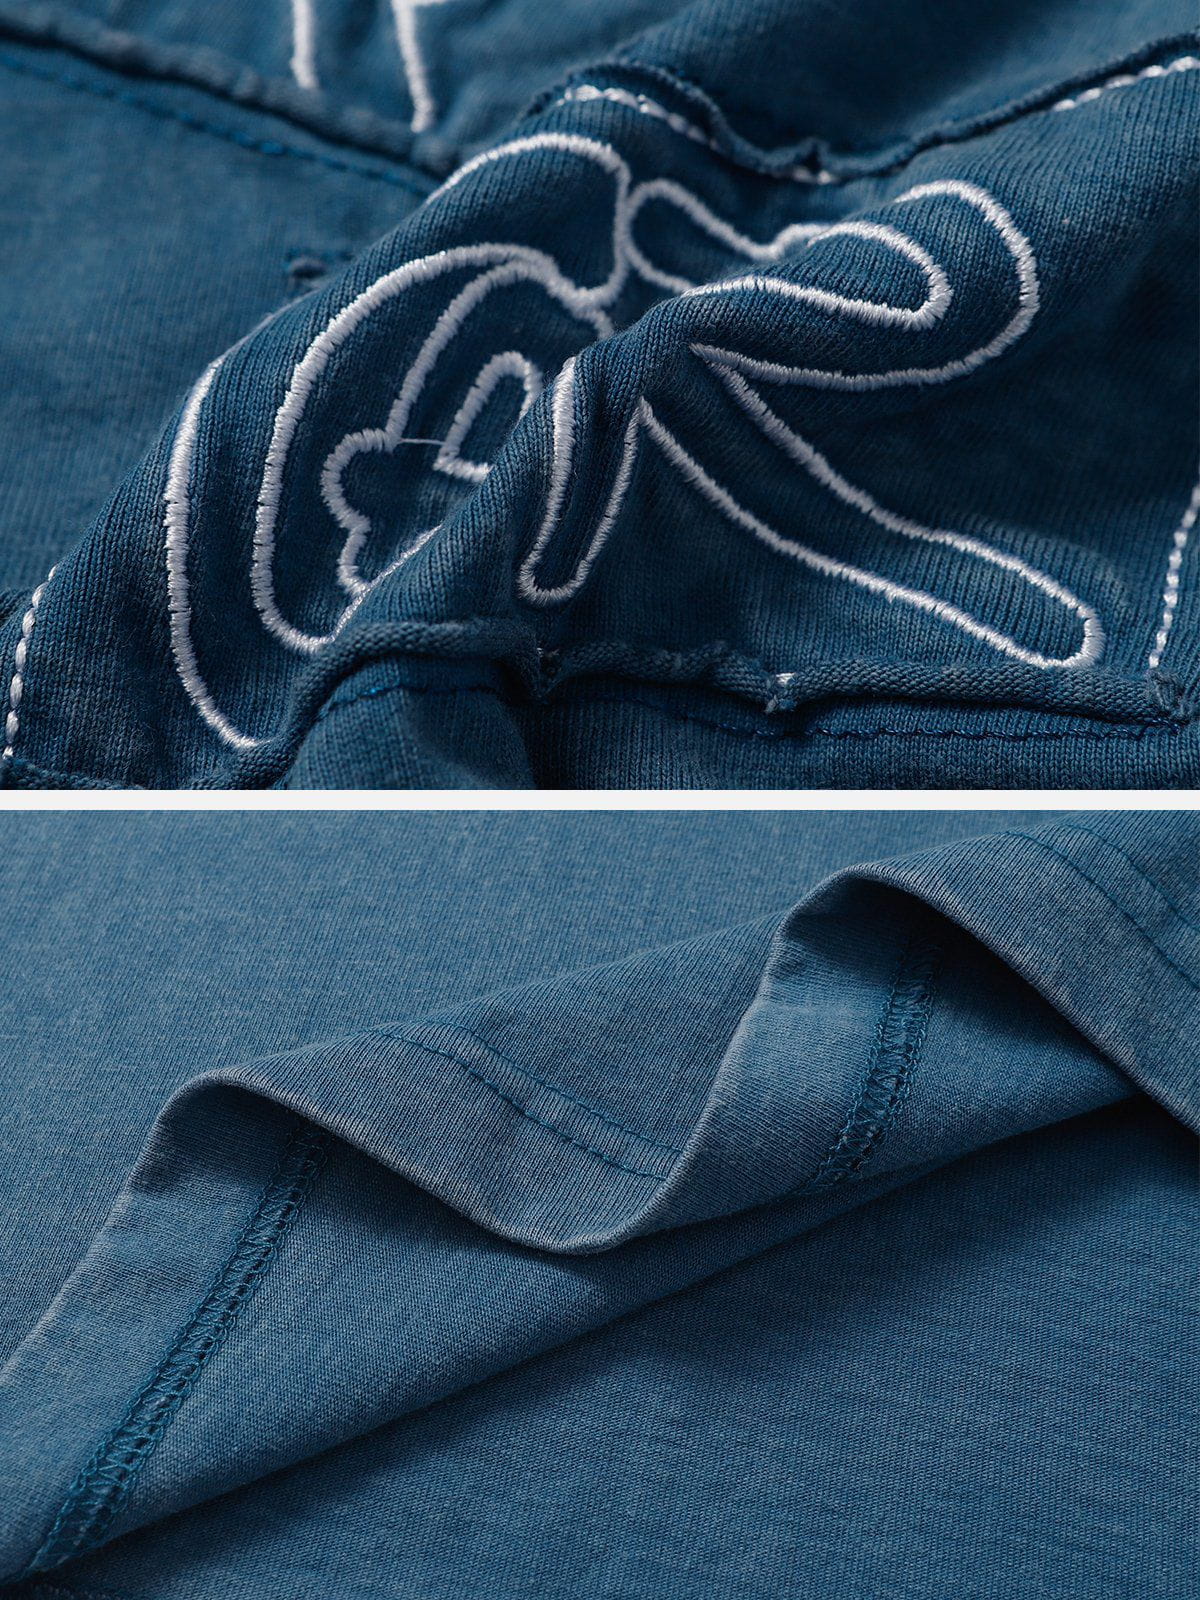 Sneakerland™ - Applique Embroidery Washed Tee